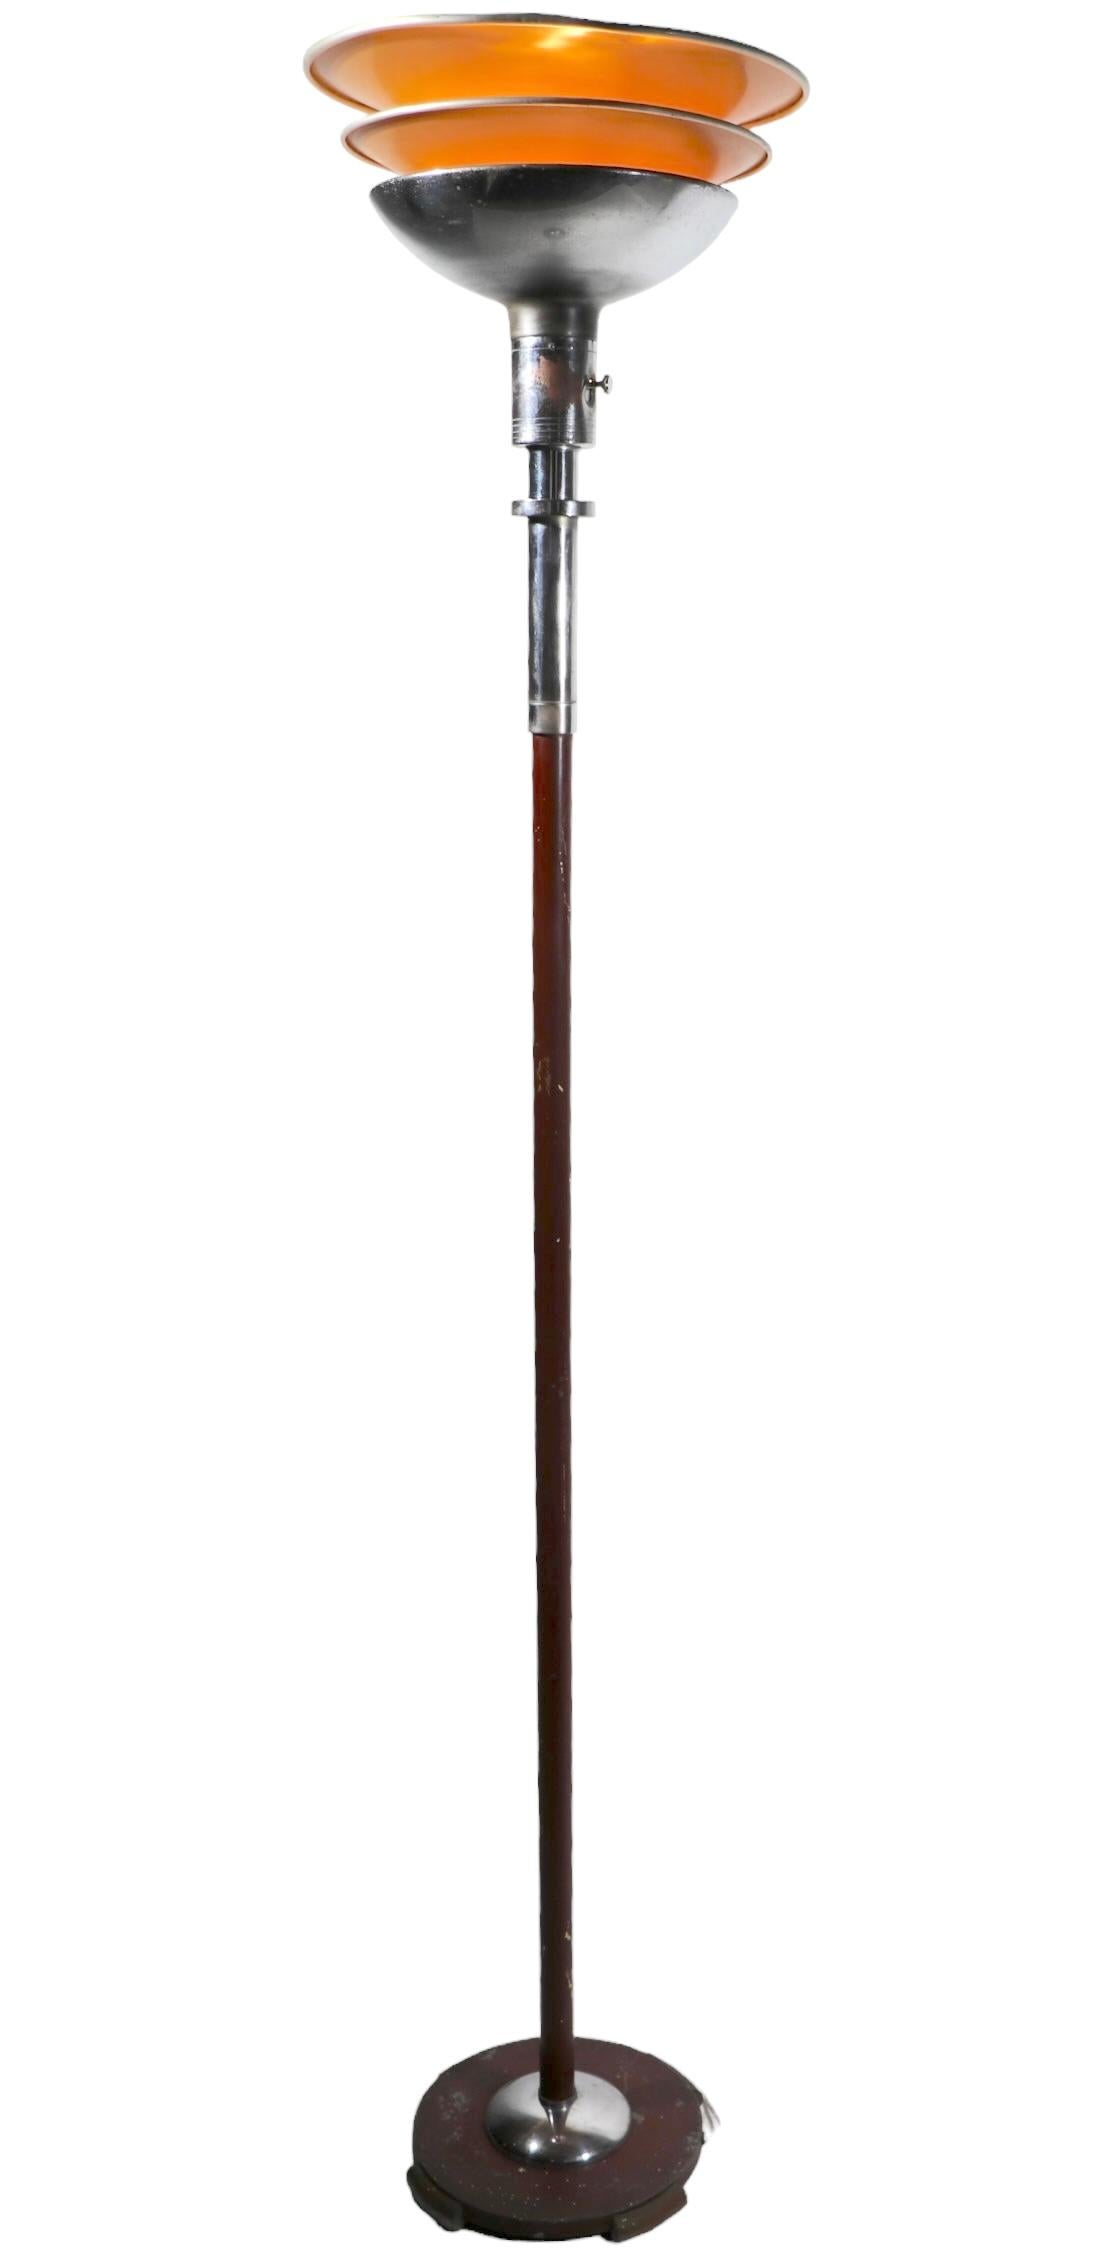 Art Deco Machine Age Torchiere  Floor Lamp by Rohde for Mutual Sunset Lamp Co.  For Sale 7